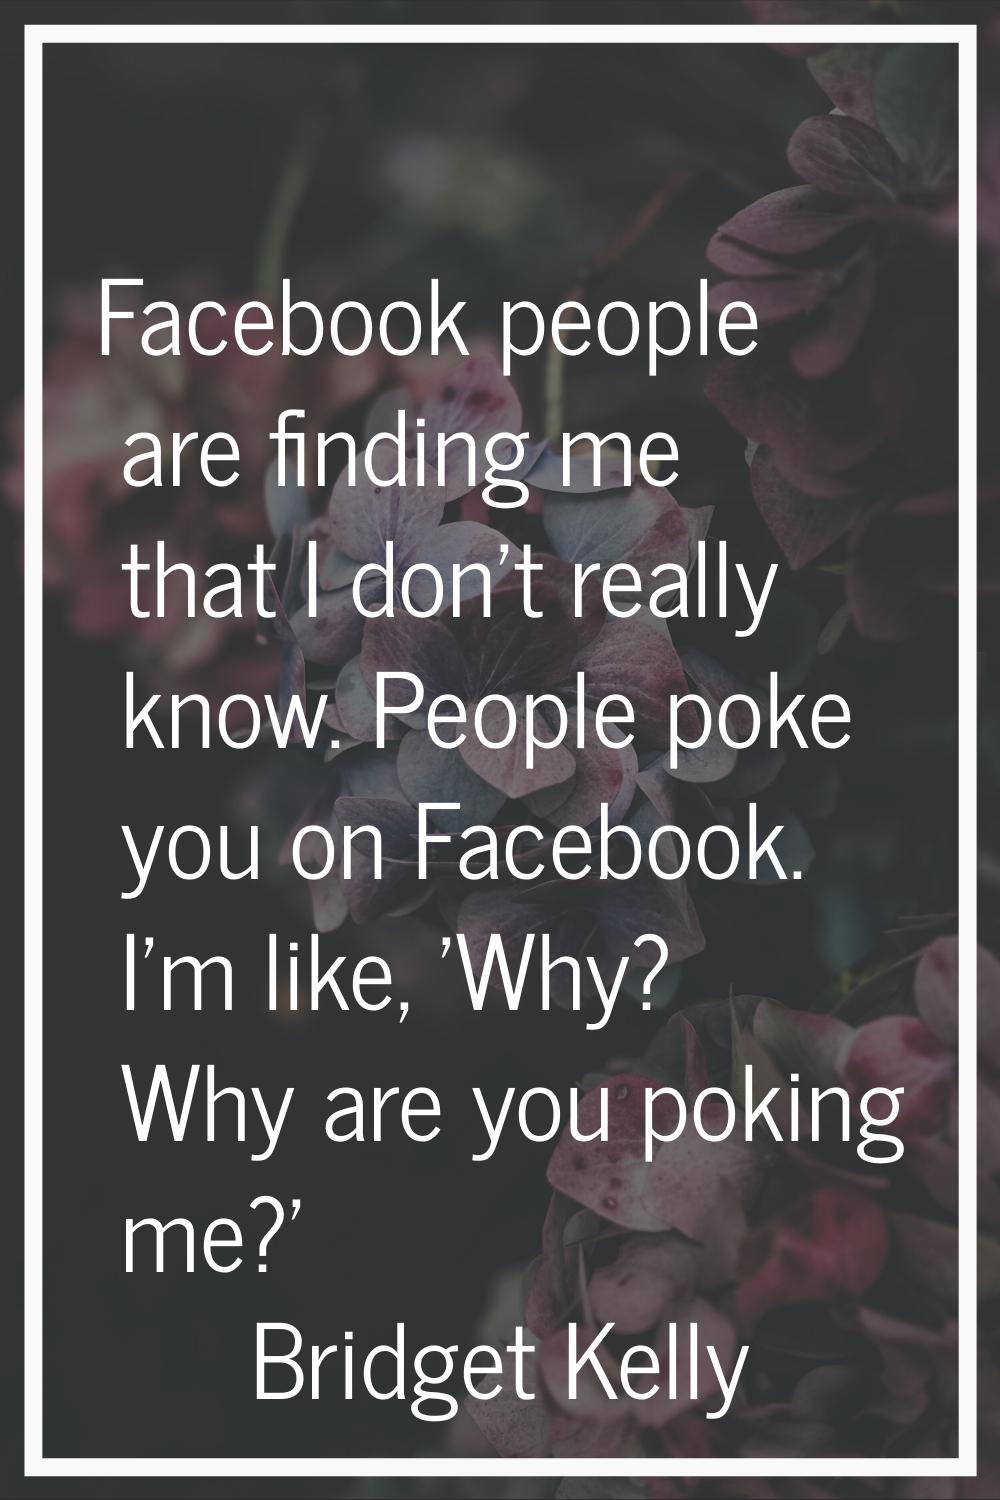 Facebook people are finding me that I don't really know. People poke you on Facebook. I'm like, 'Wh